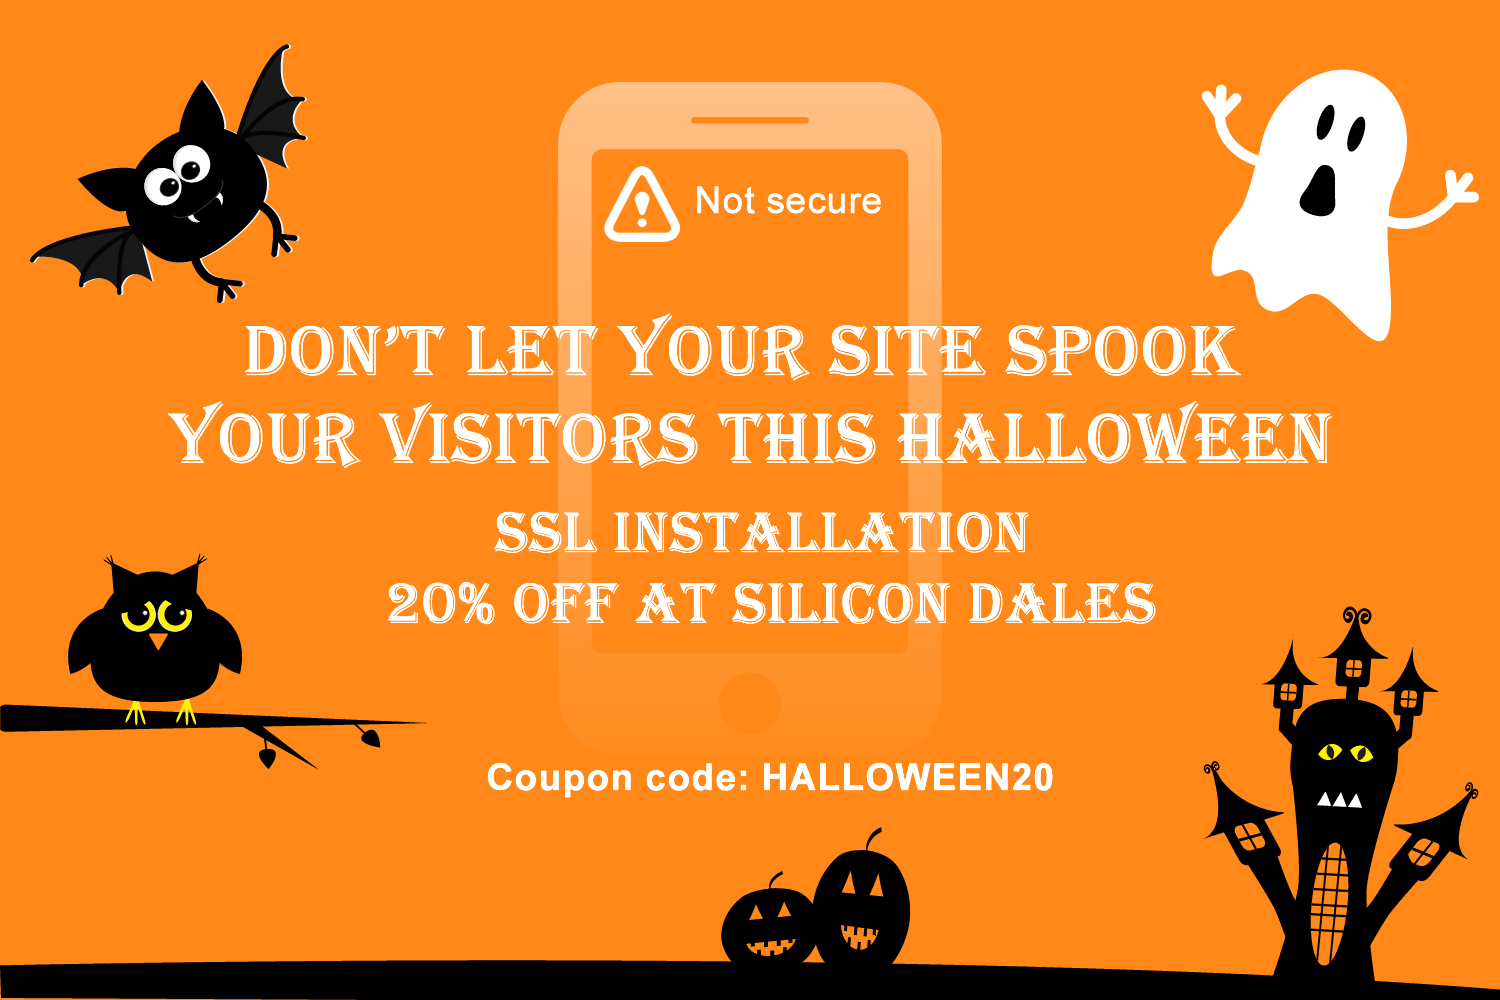 Halloween offer from Silicon Dales: 20% off SSL installation "don't let your site spook your visitors this Halloween"